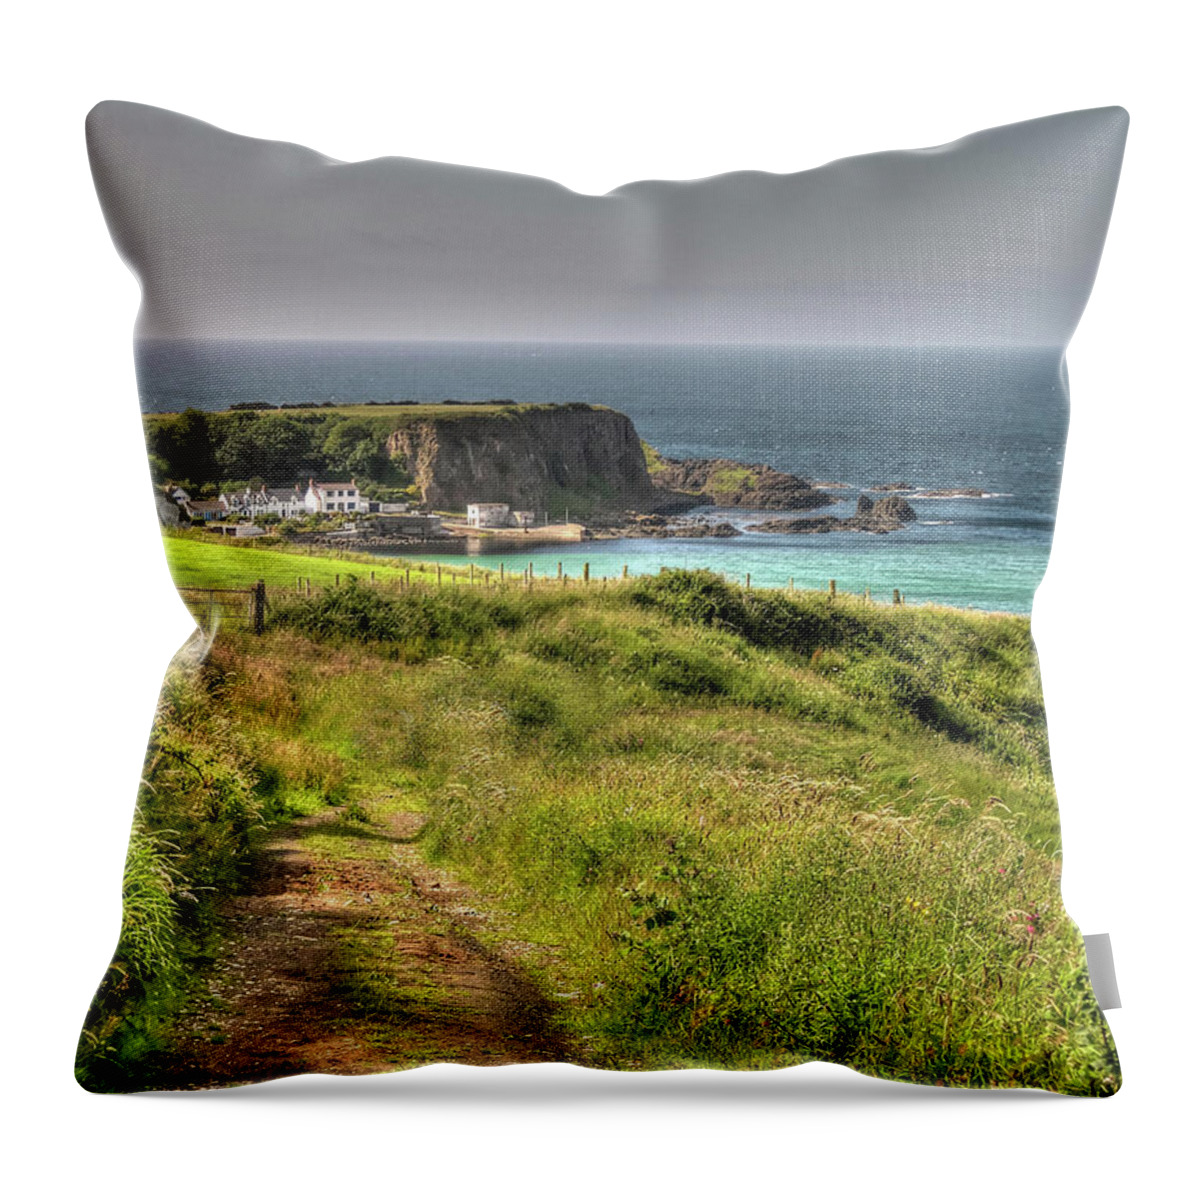 Ireland Throw Pillow featuring the photograph Path To The Sea by Randall Dill